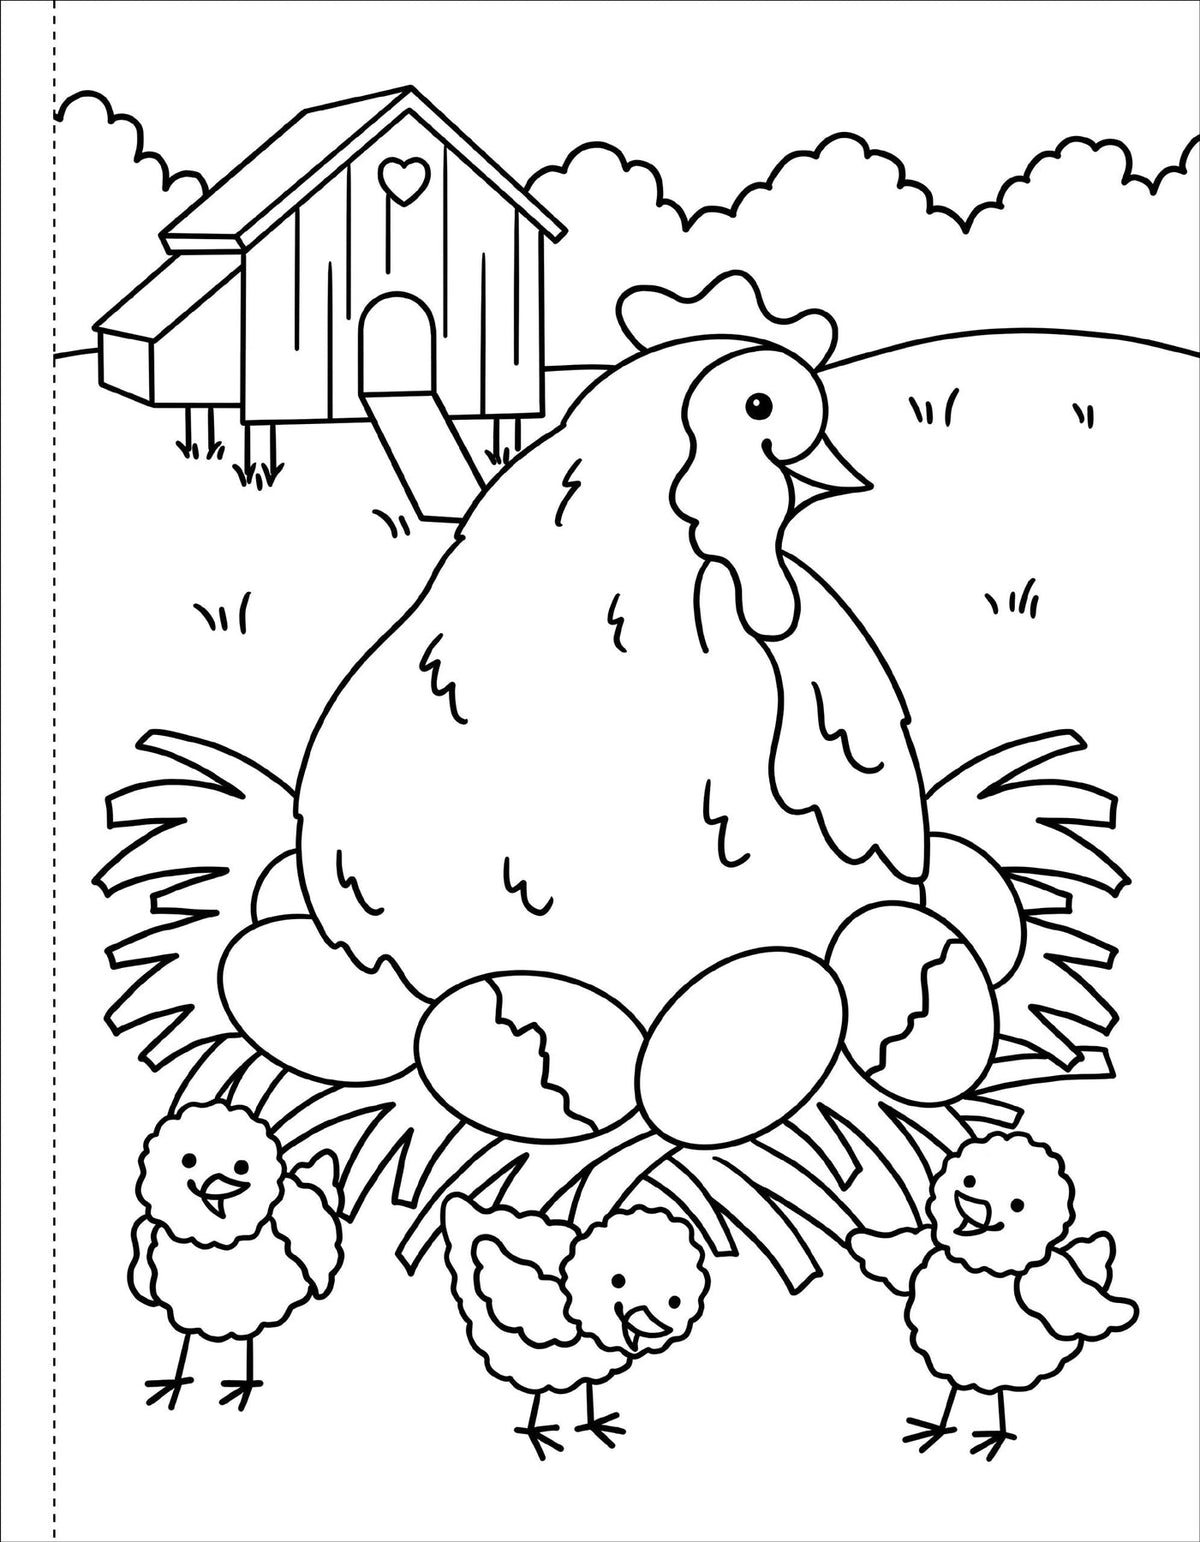 Peter Pauper My First Coloring Book On the Farm